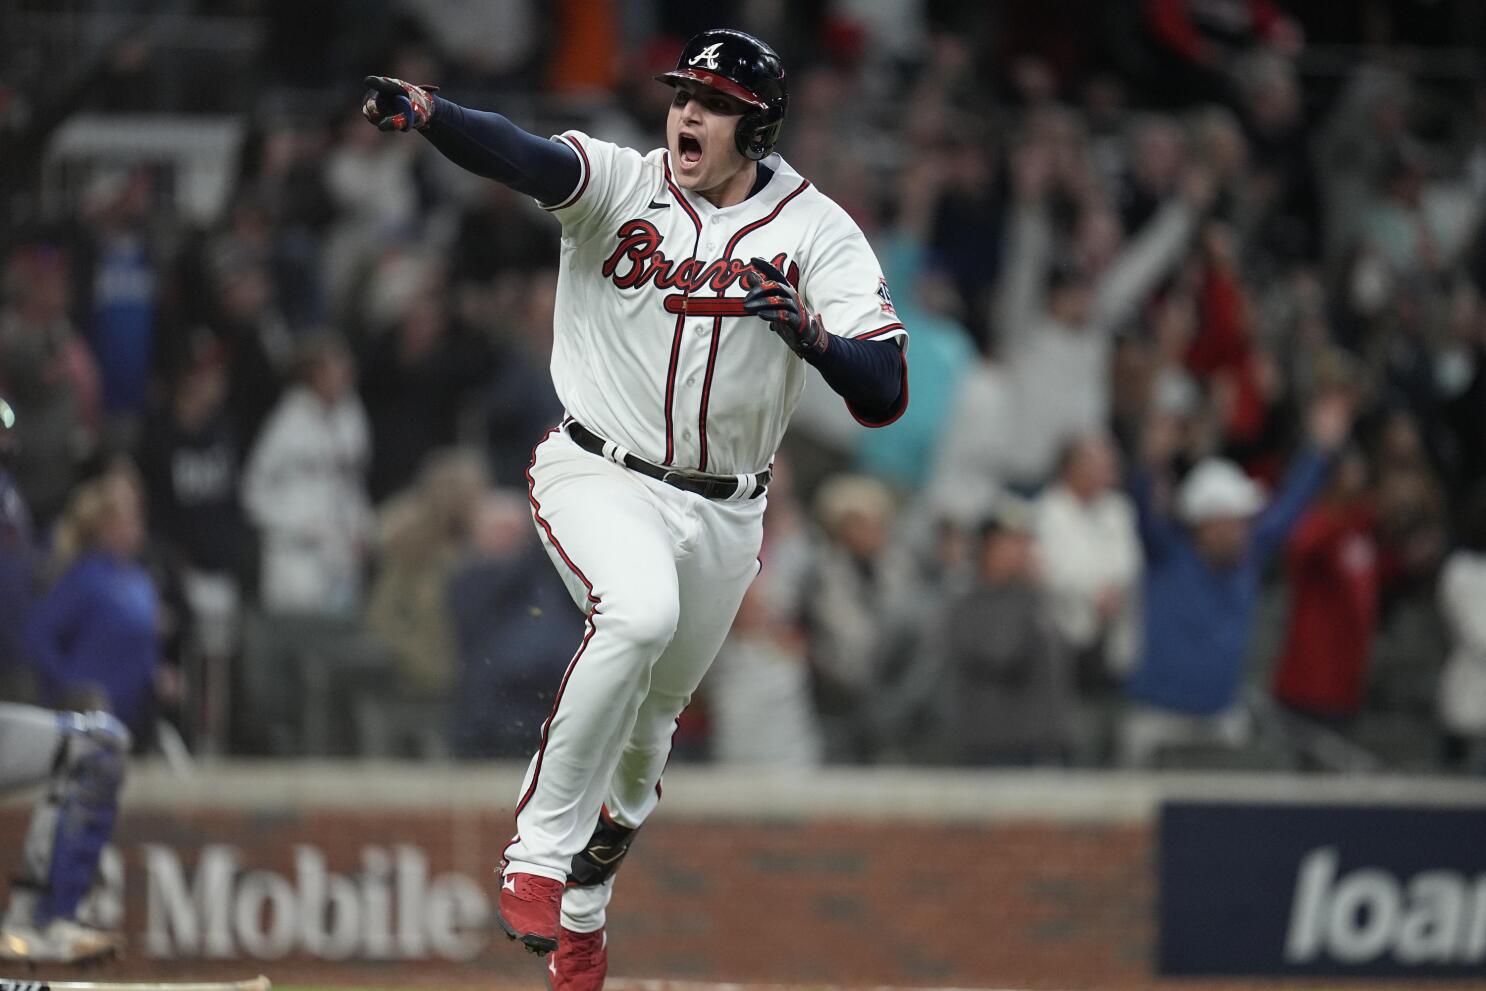 Mississippi's Riley wows in MLB debut with Braves - The Oxford Eagle